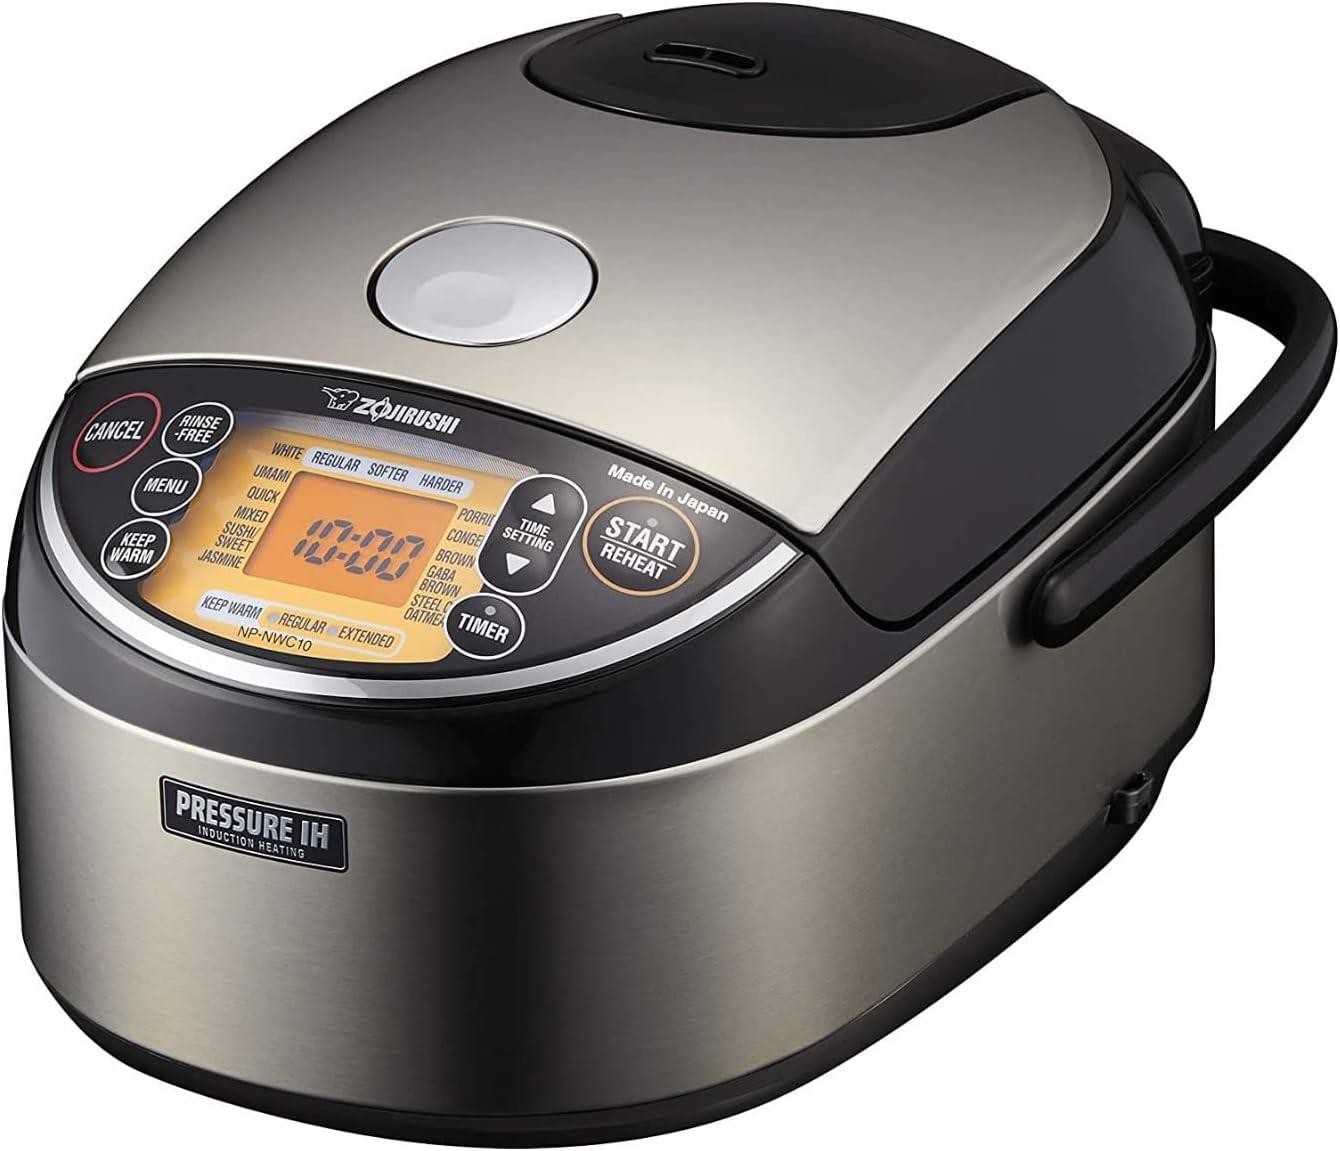 Zojirushi NP-NWC10XB Pressure Induction Heating Rice Cooker for $386.67 Shipped